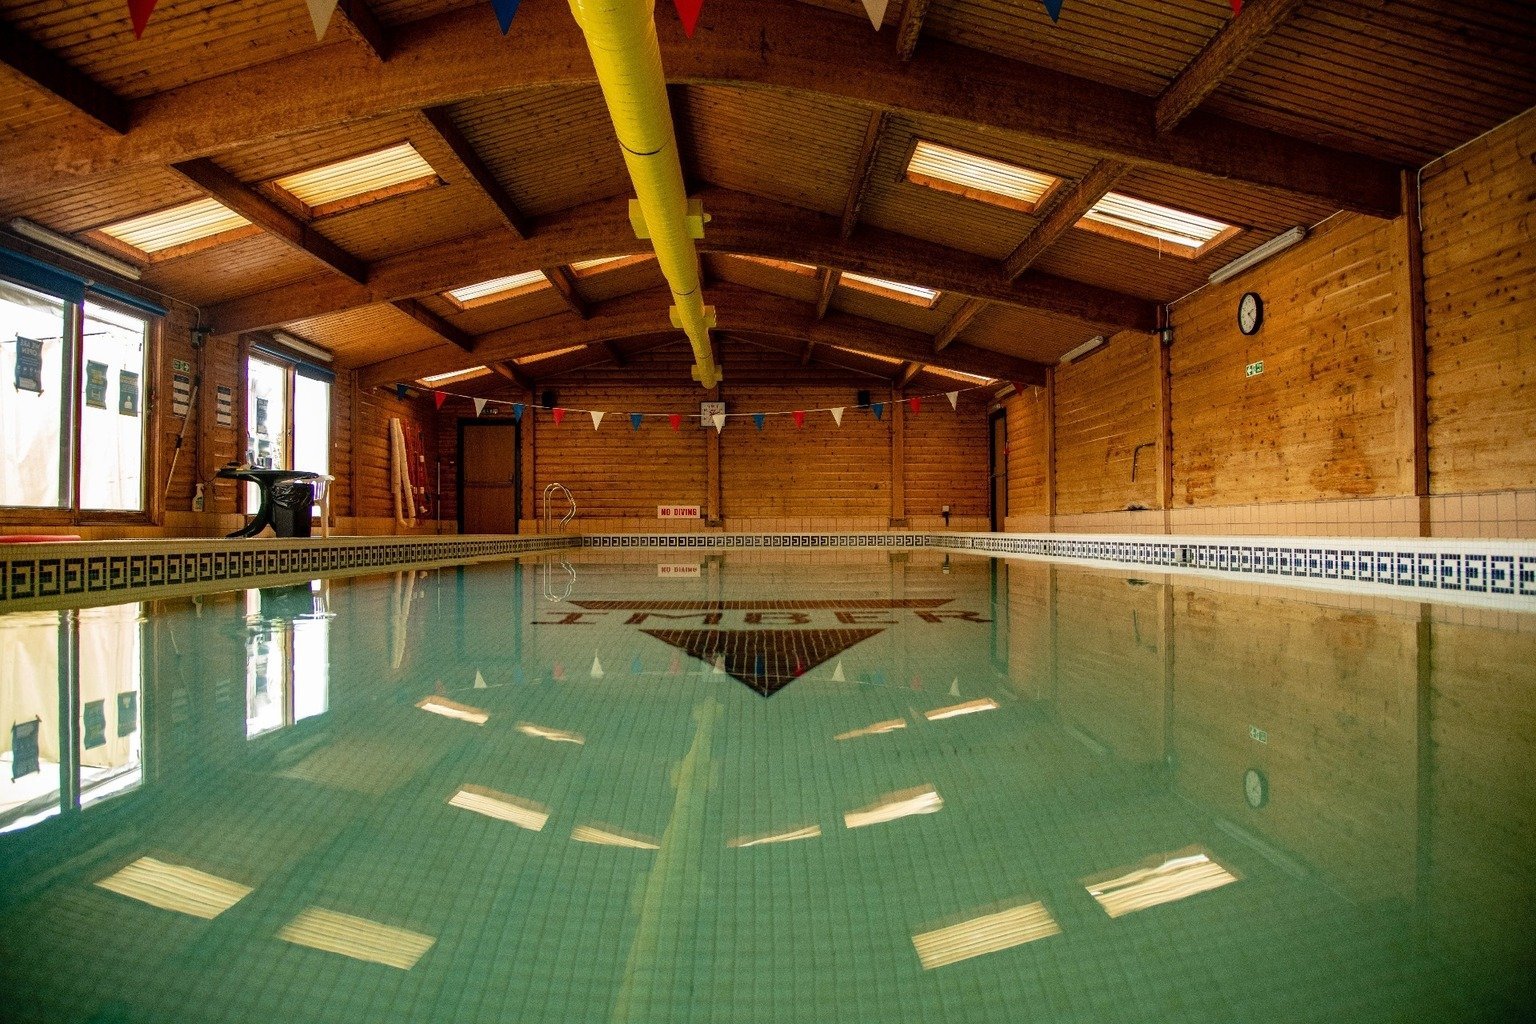 The swimming pool at imber court